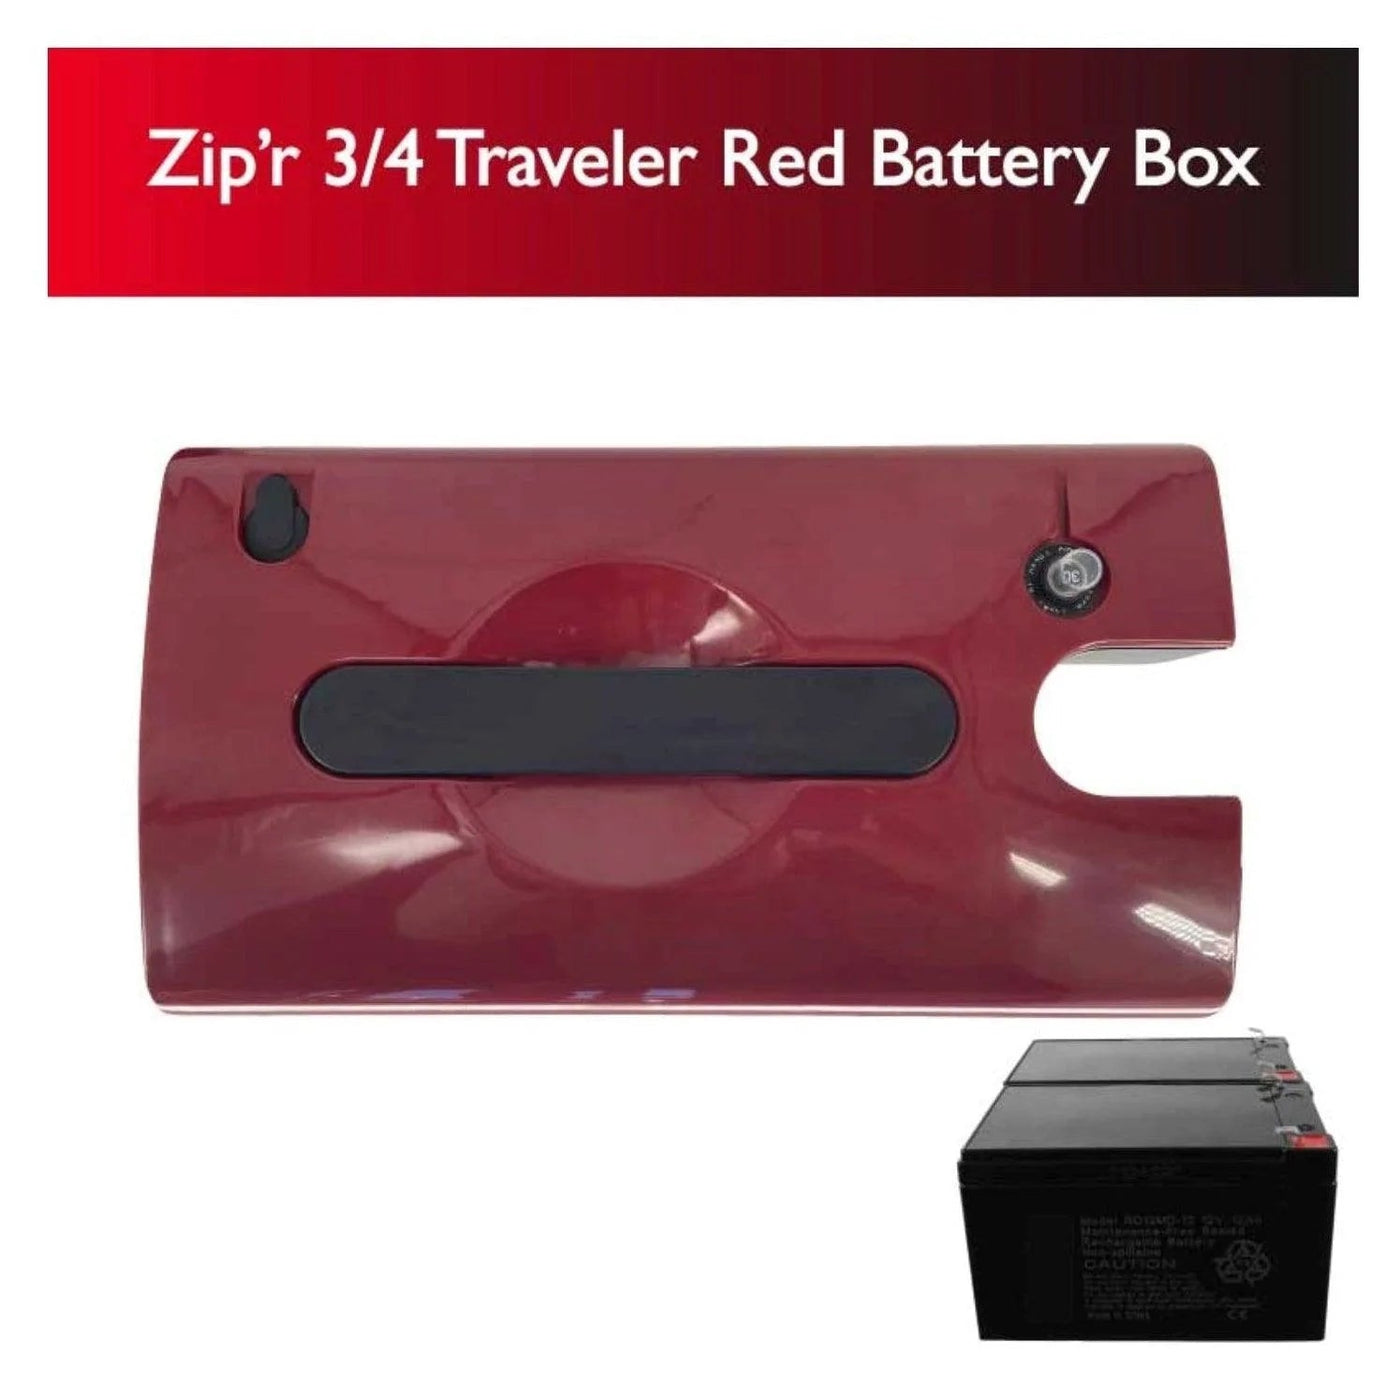 Zip'r Mobility Scooter Battery Box with (2) Batteries for Zipr Traveler & Xtra-TSA Approved - eBike Haul